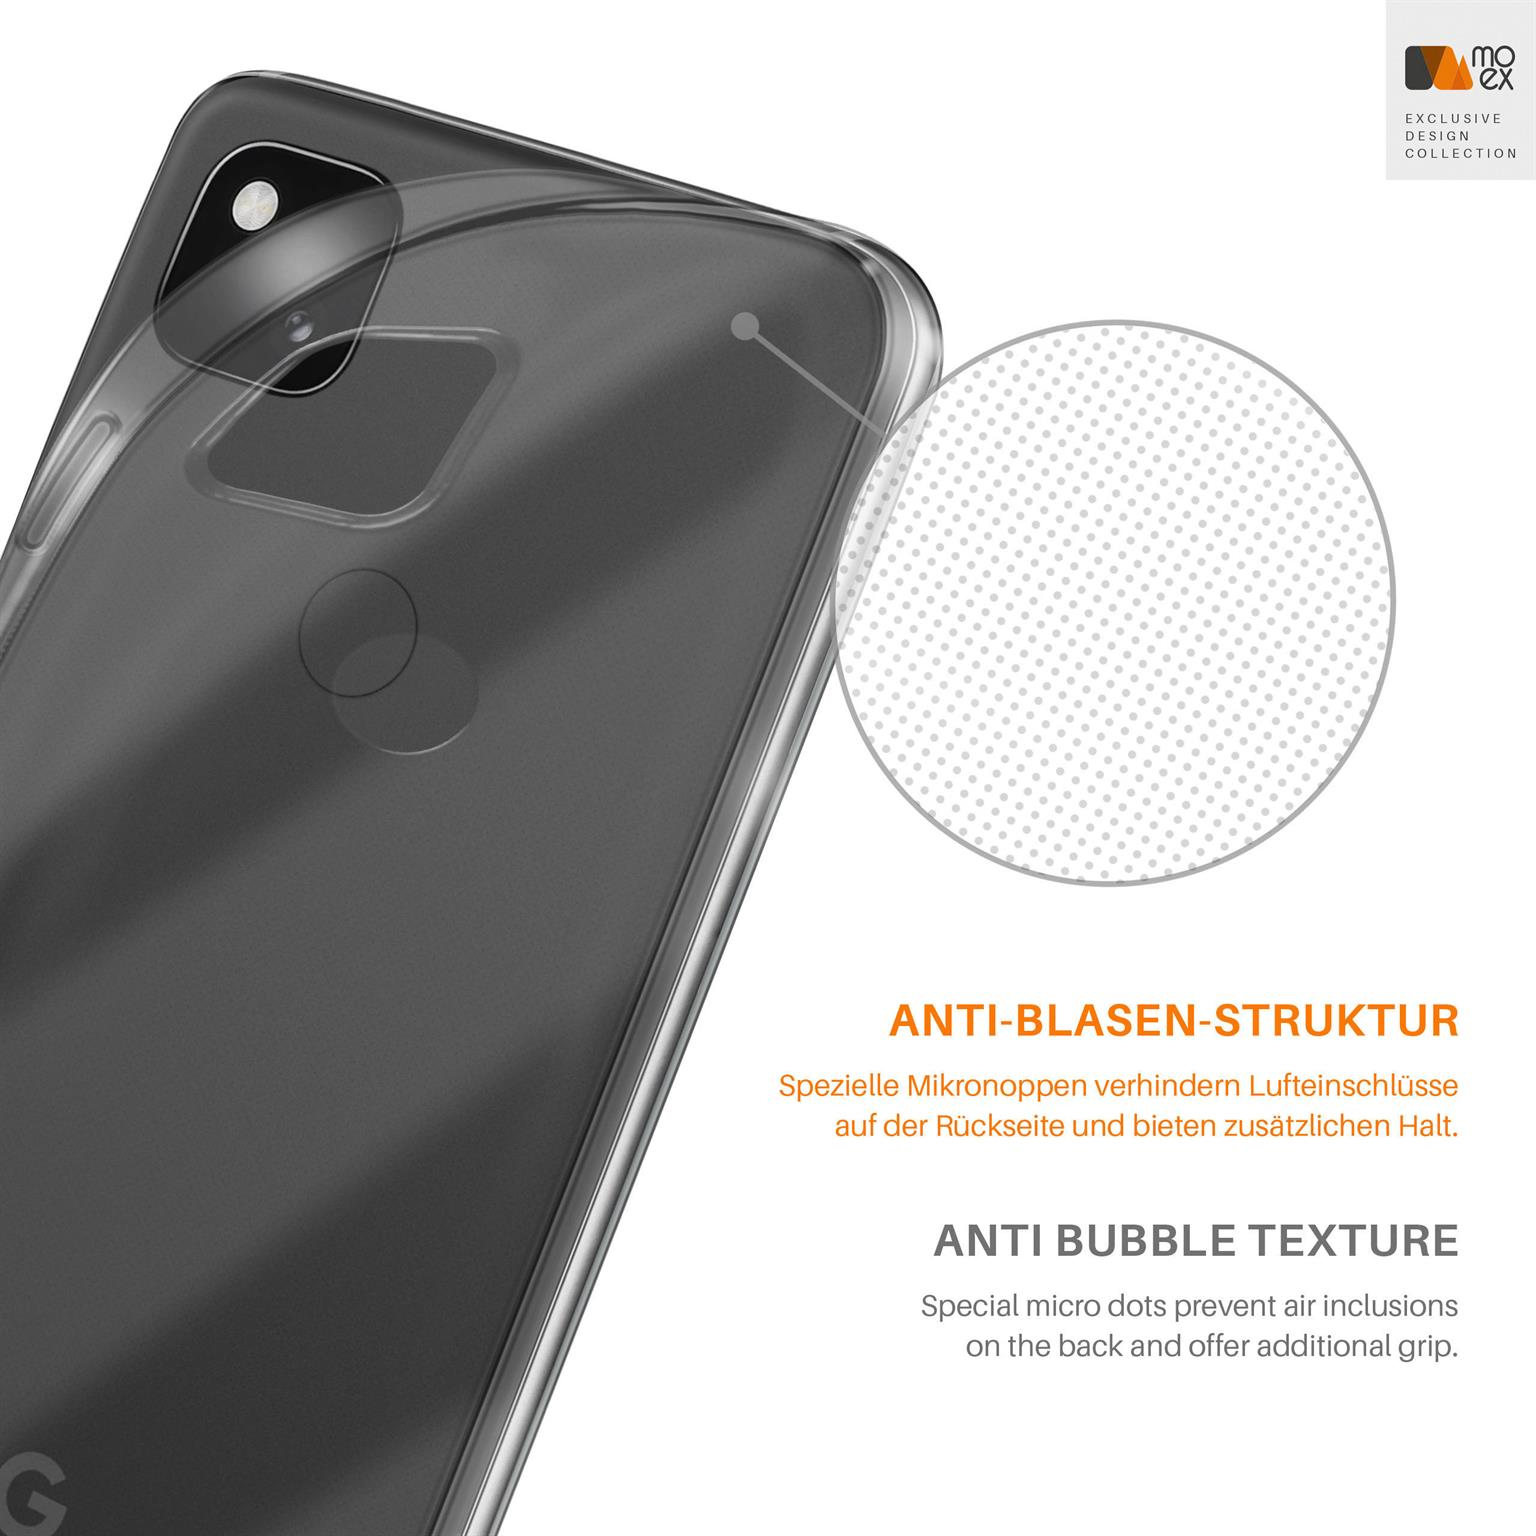 MOEX Aero Case, 4a, Pixel Backcover, Crystal-Clear Google